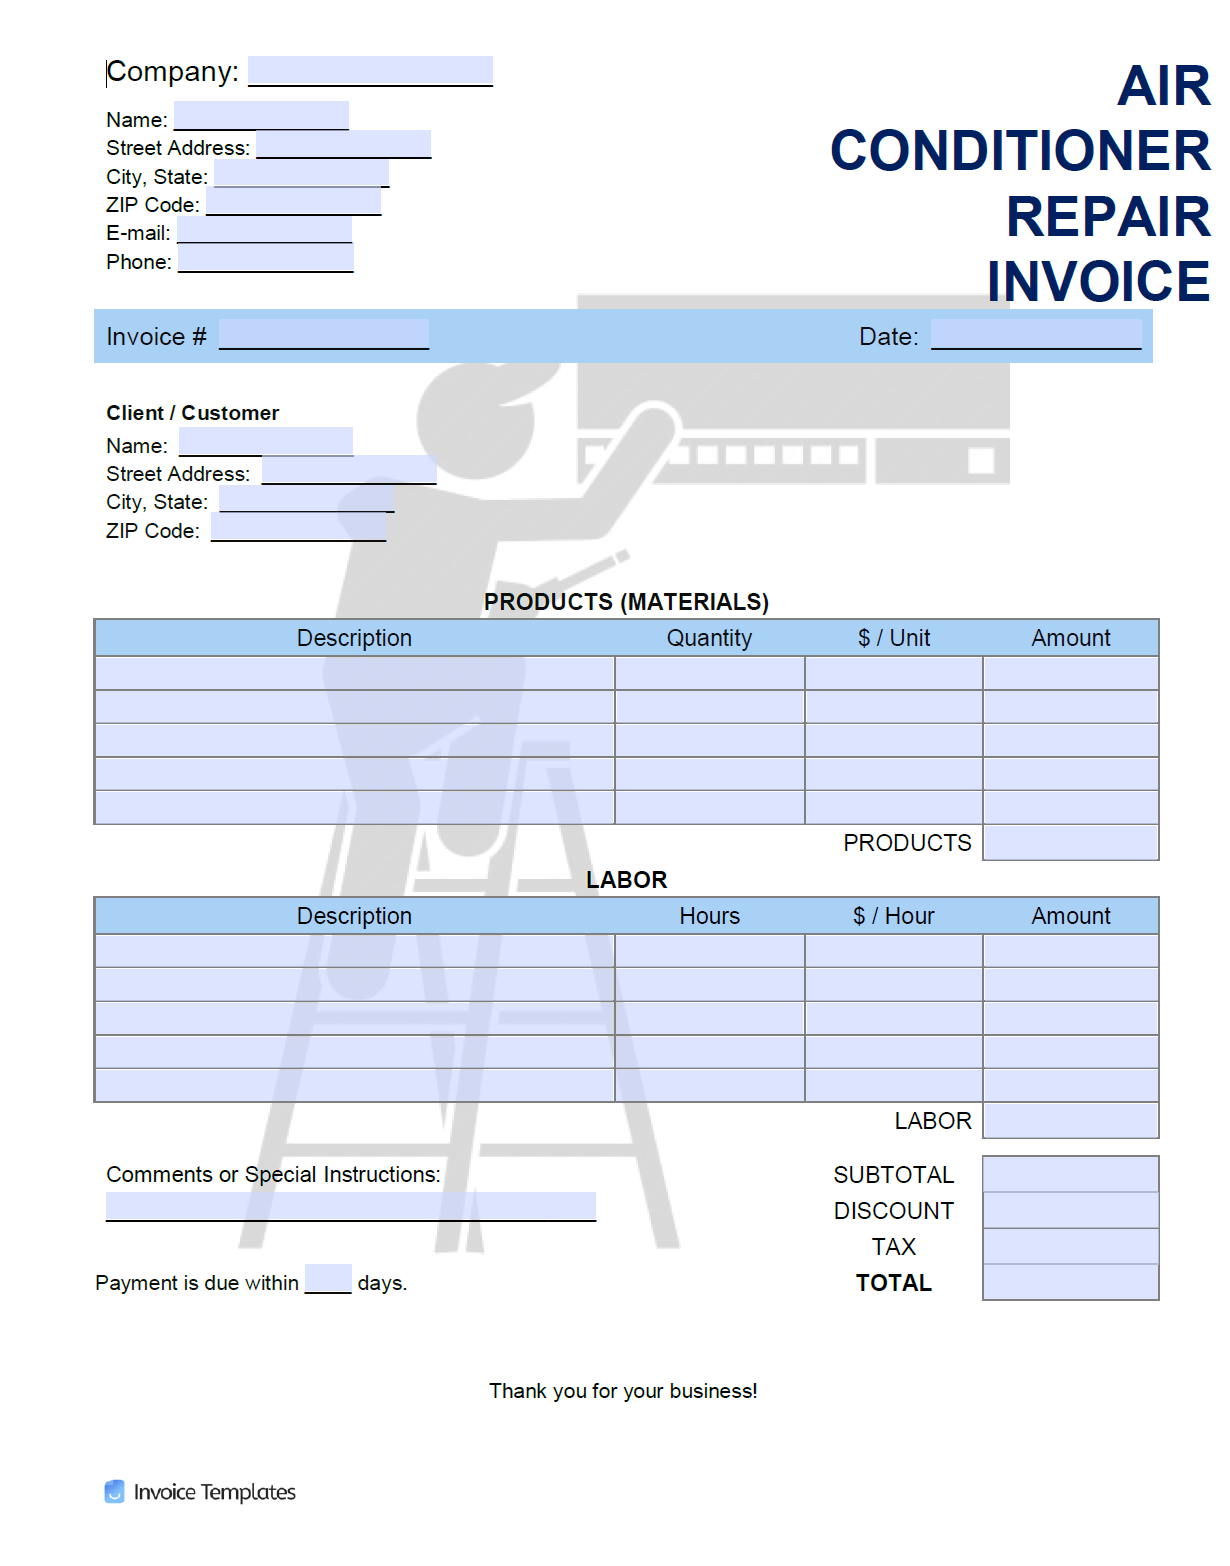 Free Air Conditioner (AC) Repair Invoice Template  PDF  WORD  EXCEL Throughout Hvac Service Invoice Template Free